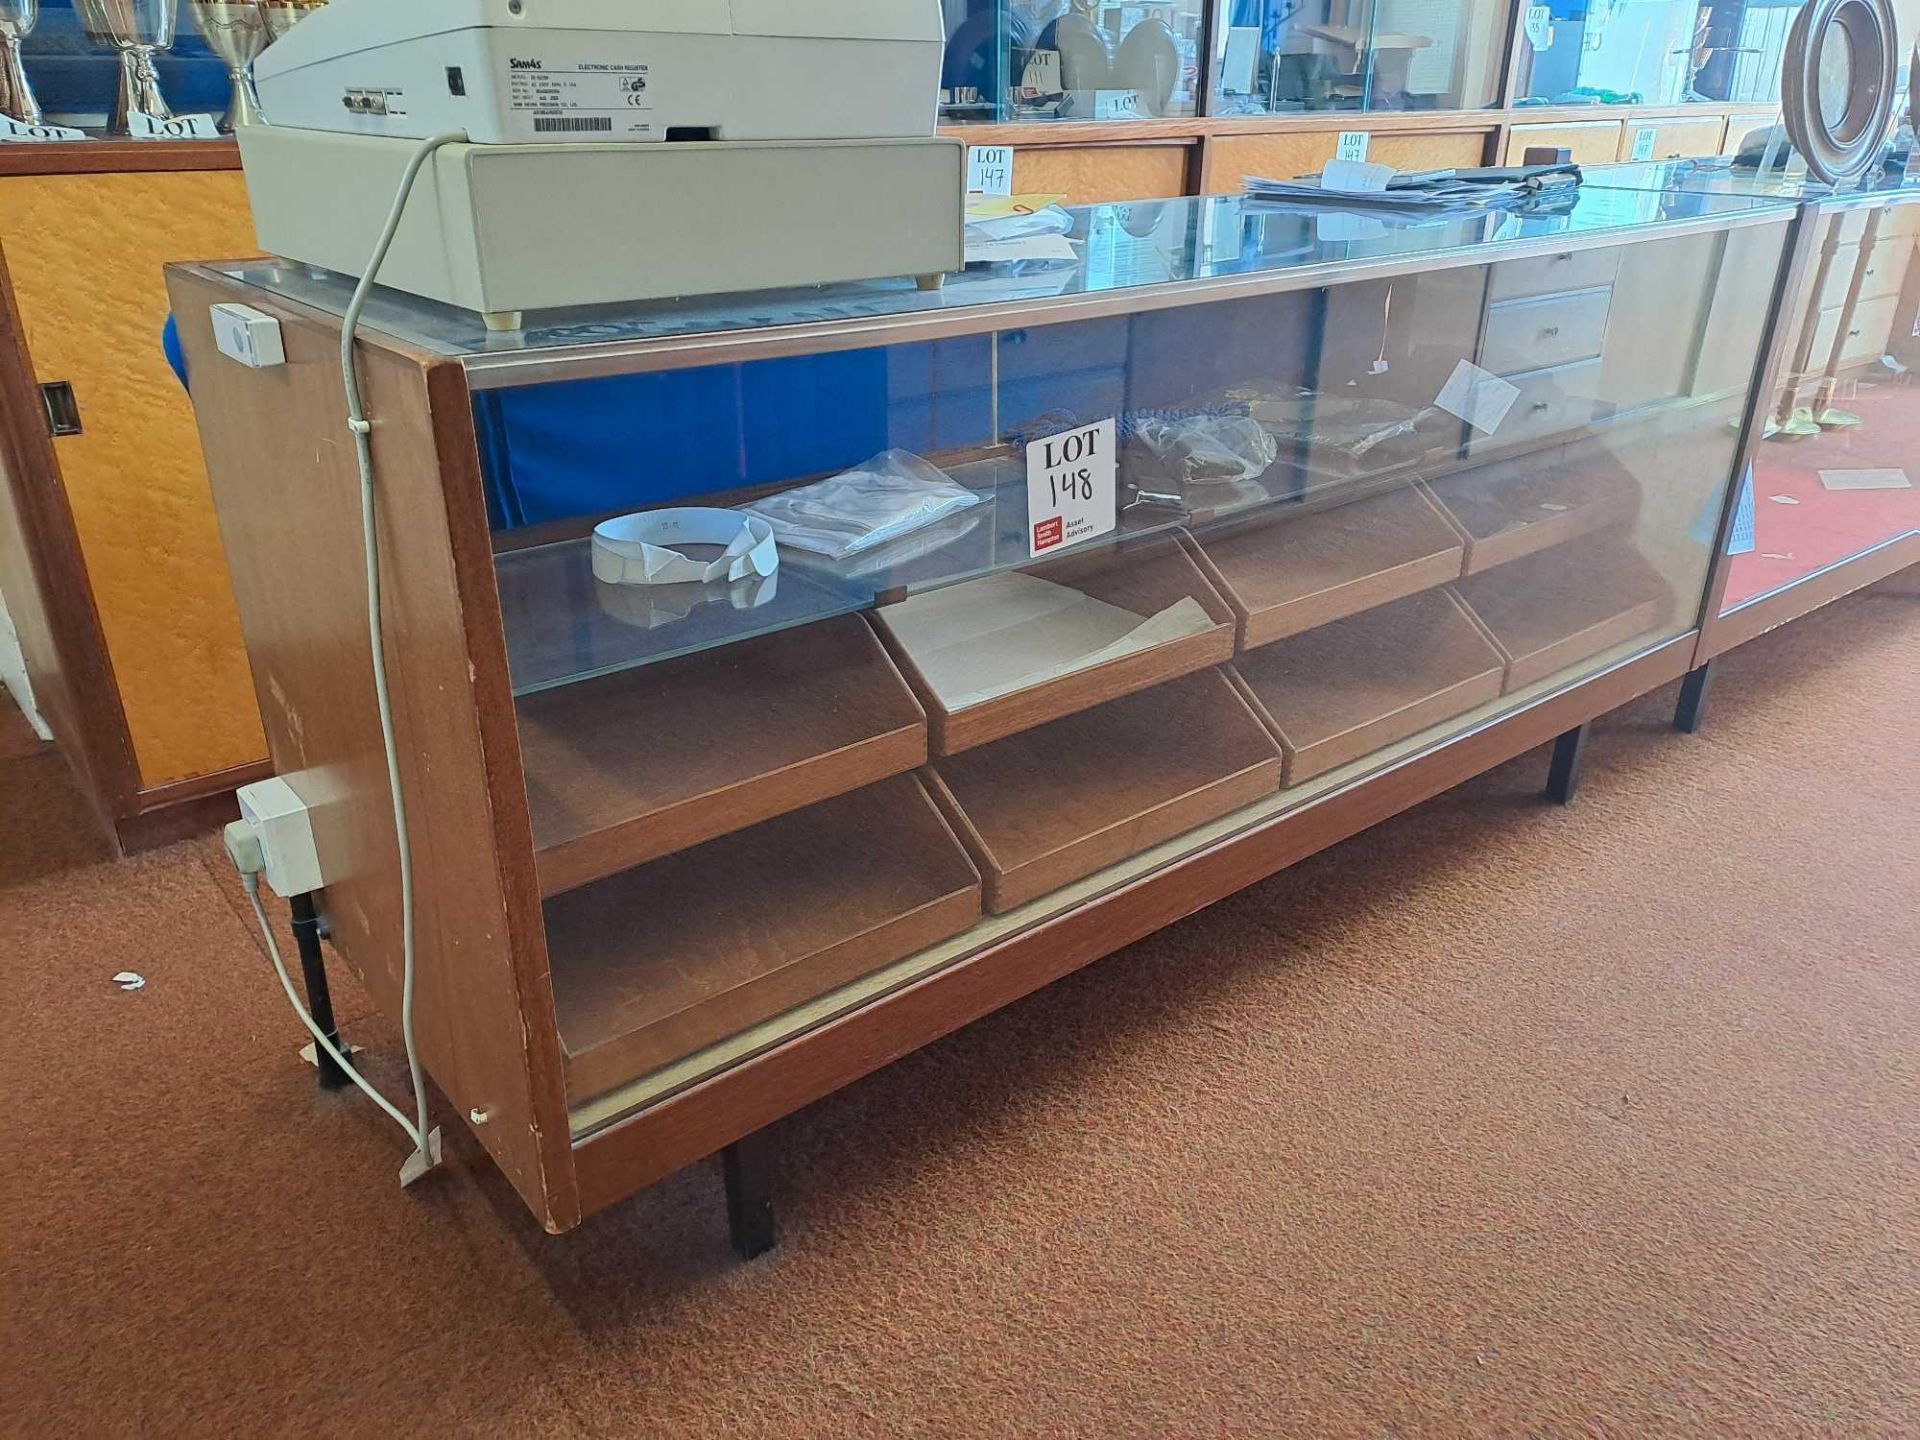 Three wooden framed, glass fronted, shop display units